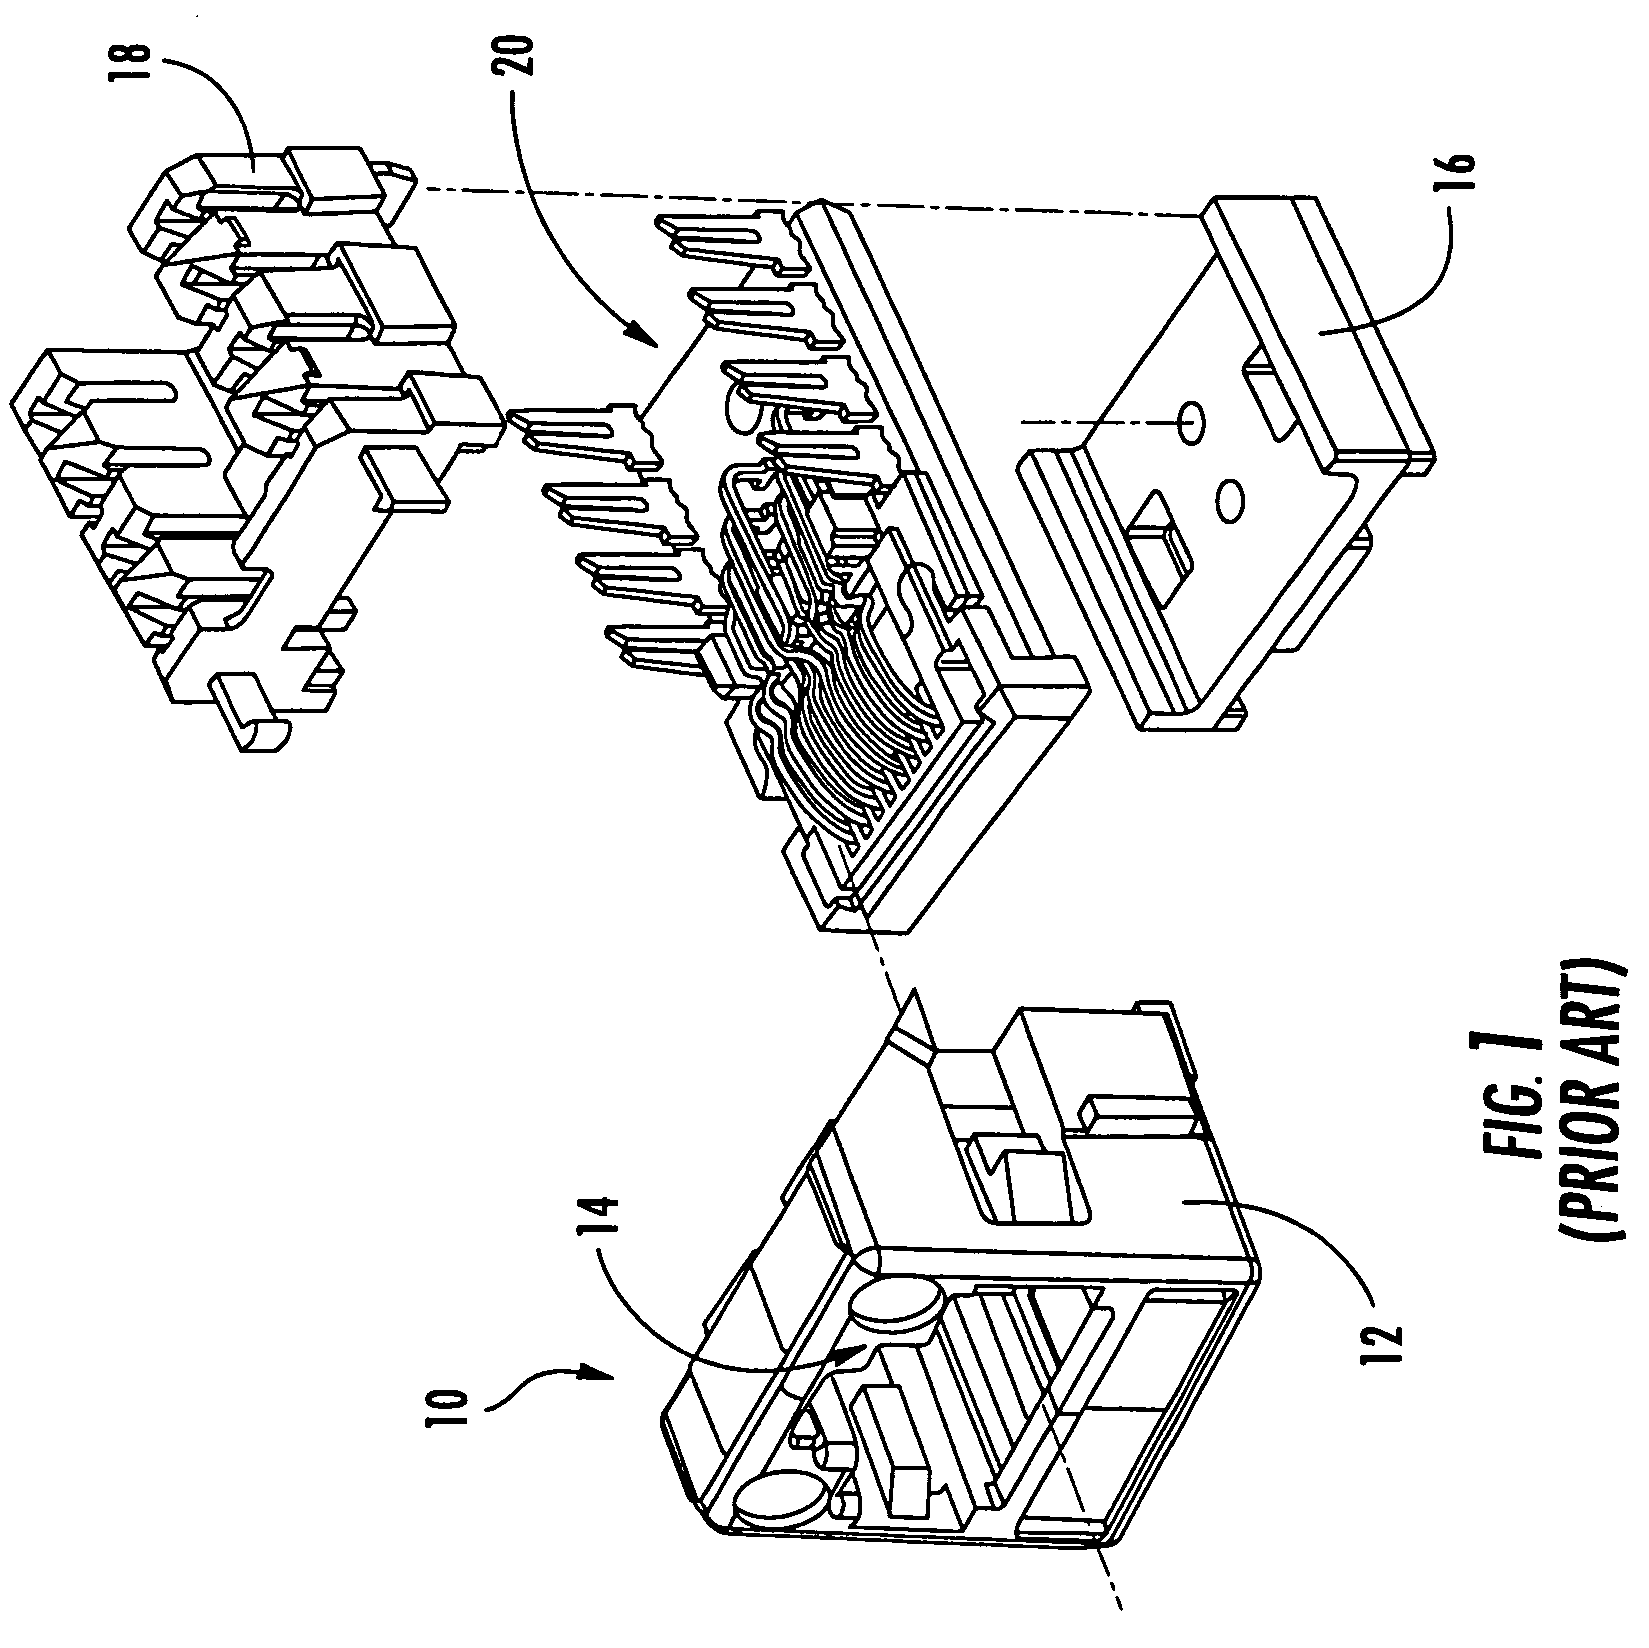 Communications jack with printed wiring board having self-coupling conductors